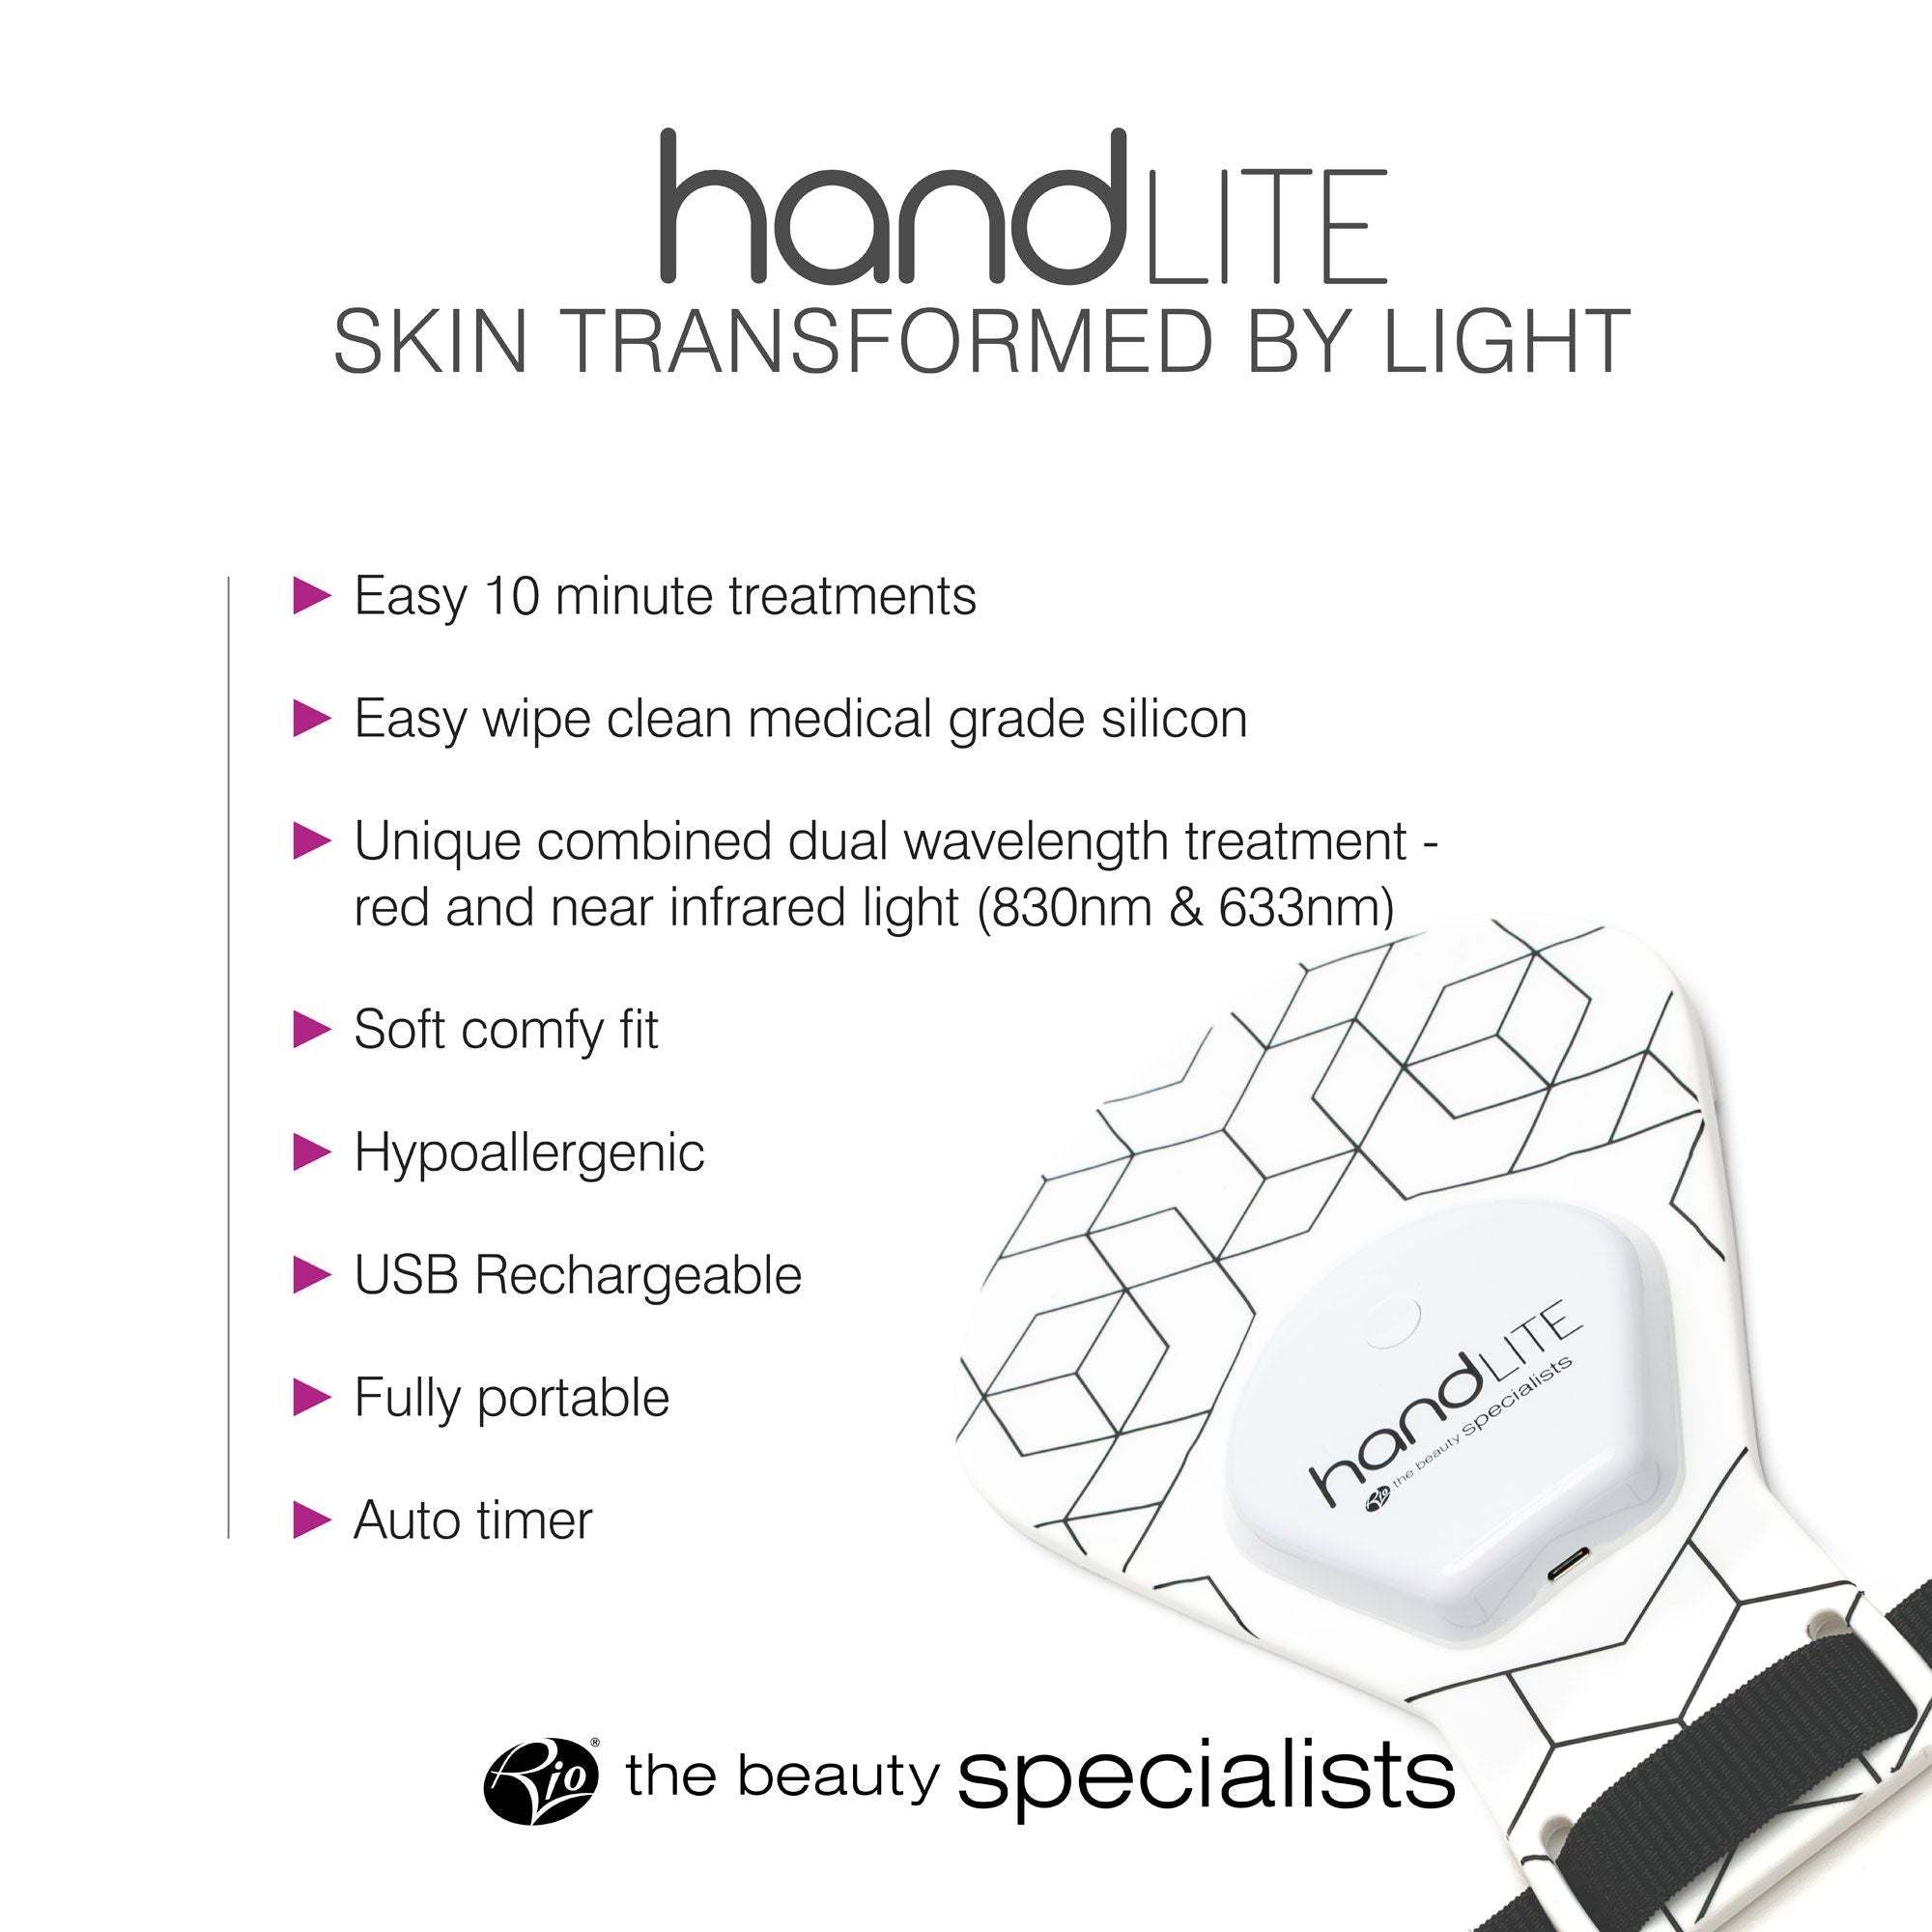 Bullet point list of features for the handLITE LED light treatment glove.